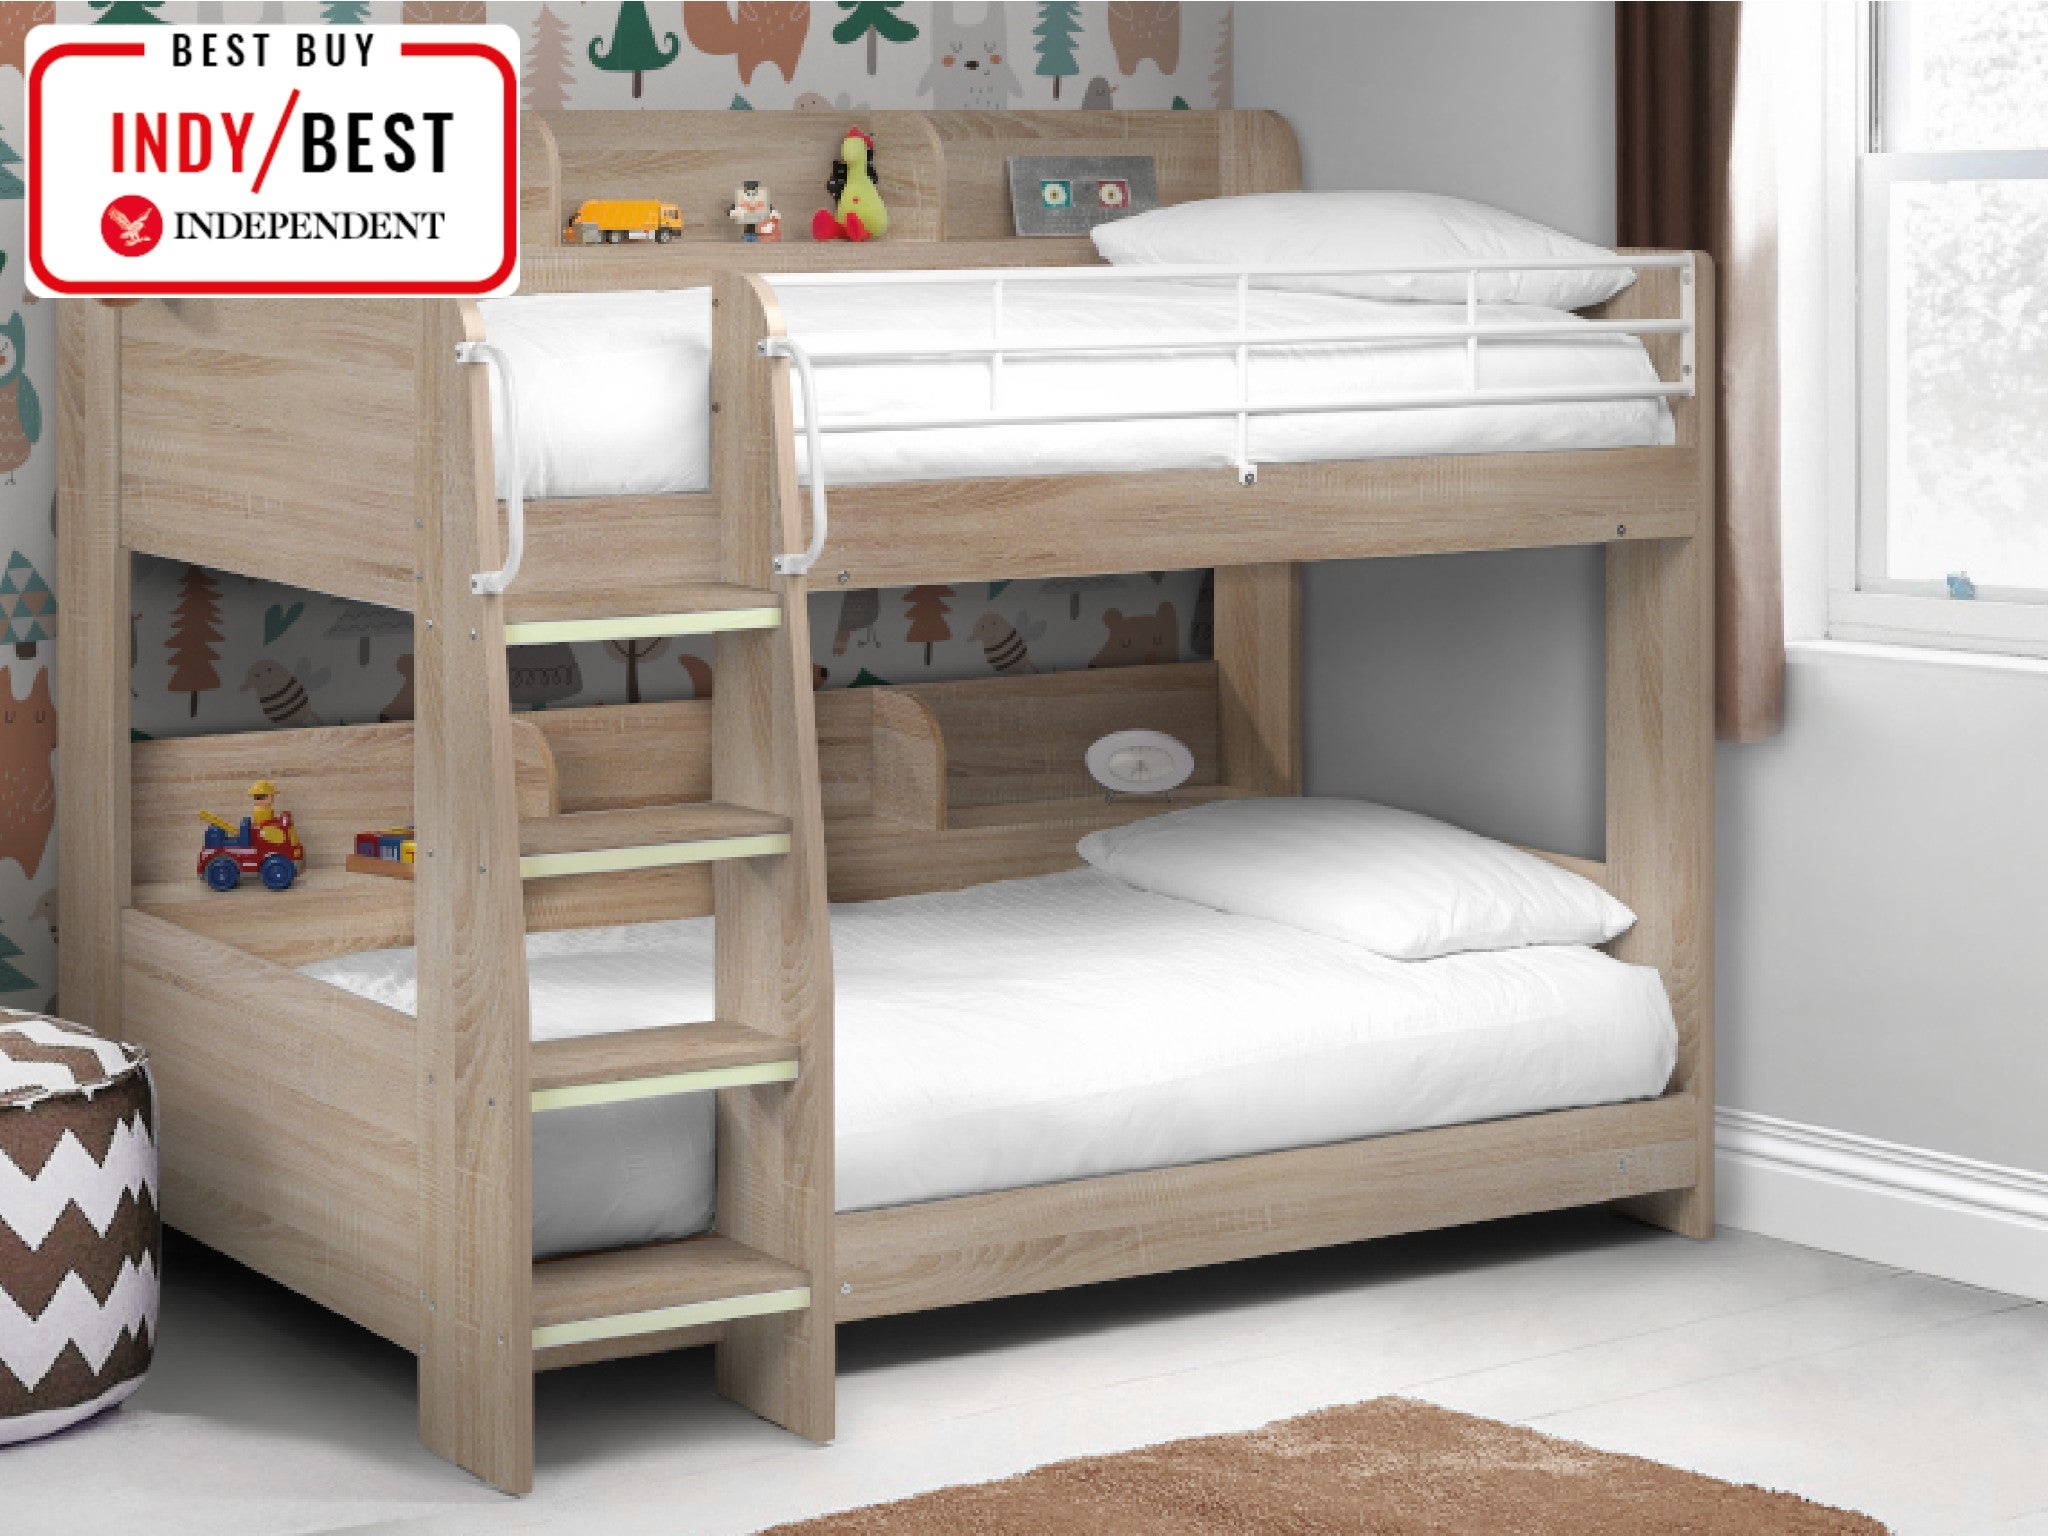 Triple sleeper bed bunk bed double bed in white or children bunk bed in pine oak 